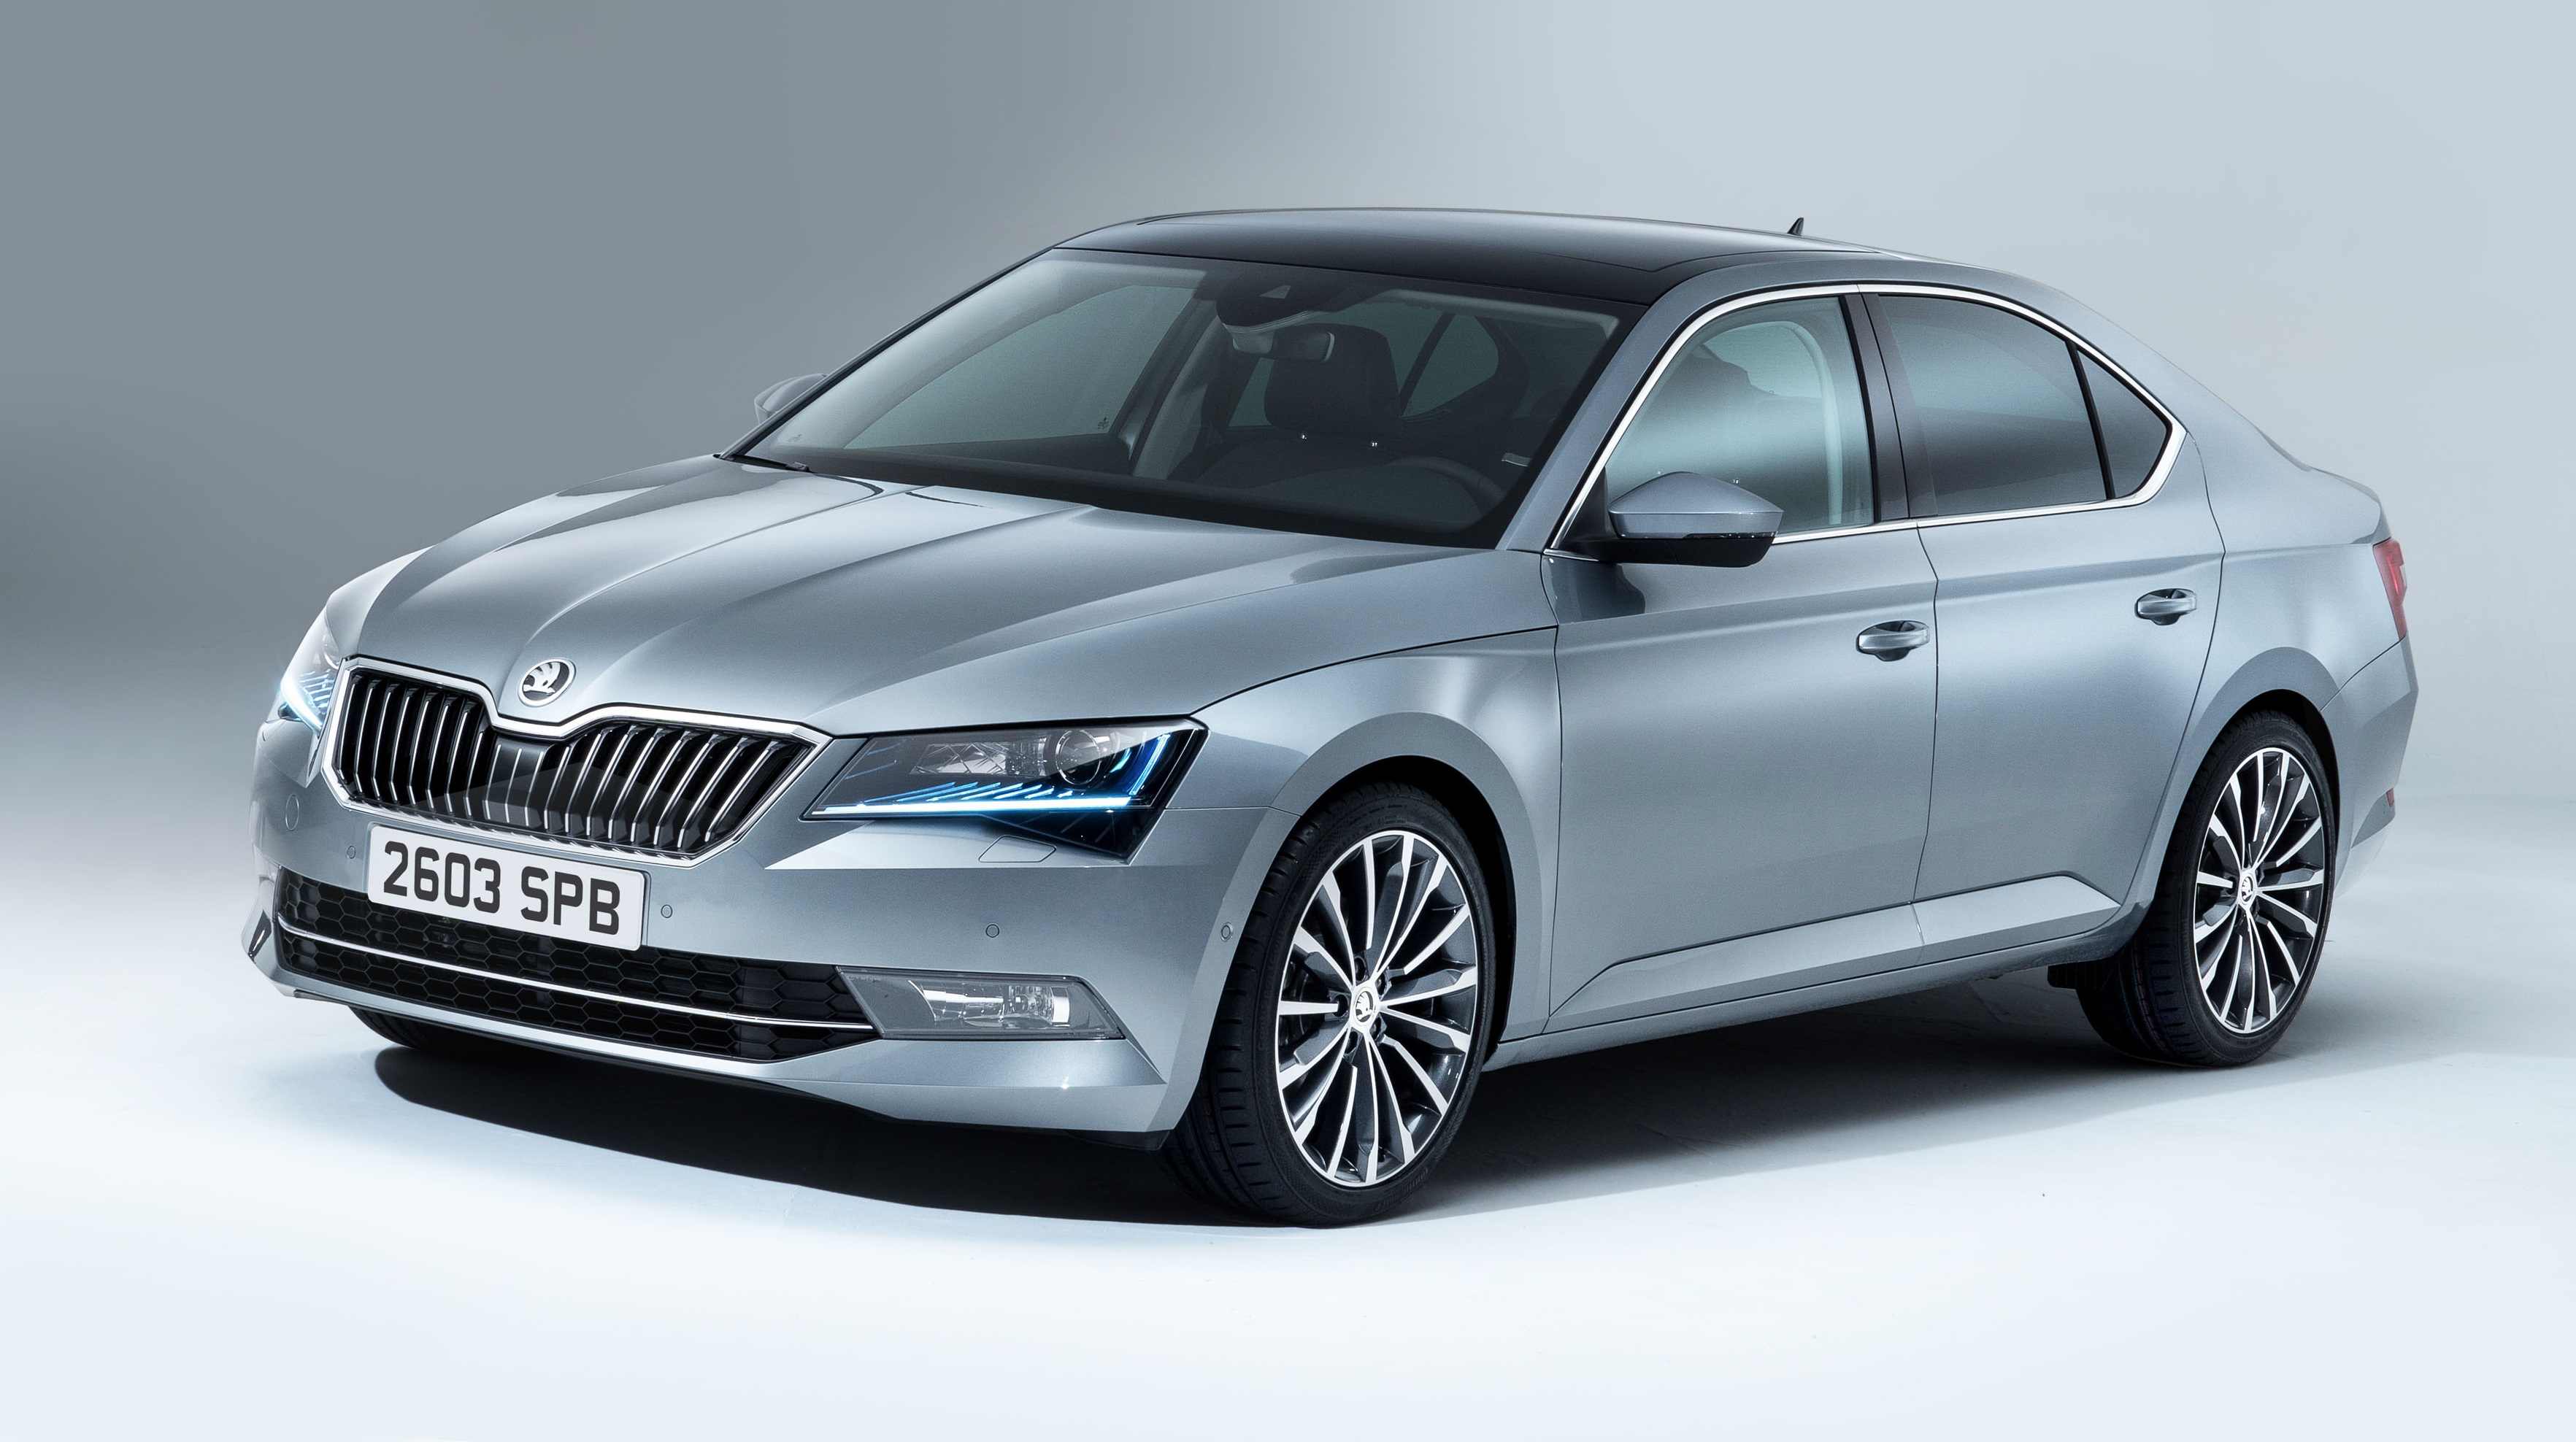 Skoda Superb Full Prices And Specs Revealed Carwow My Xxx Hot Girl 